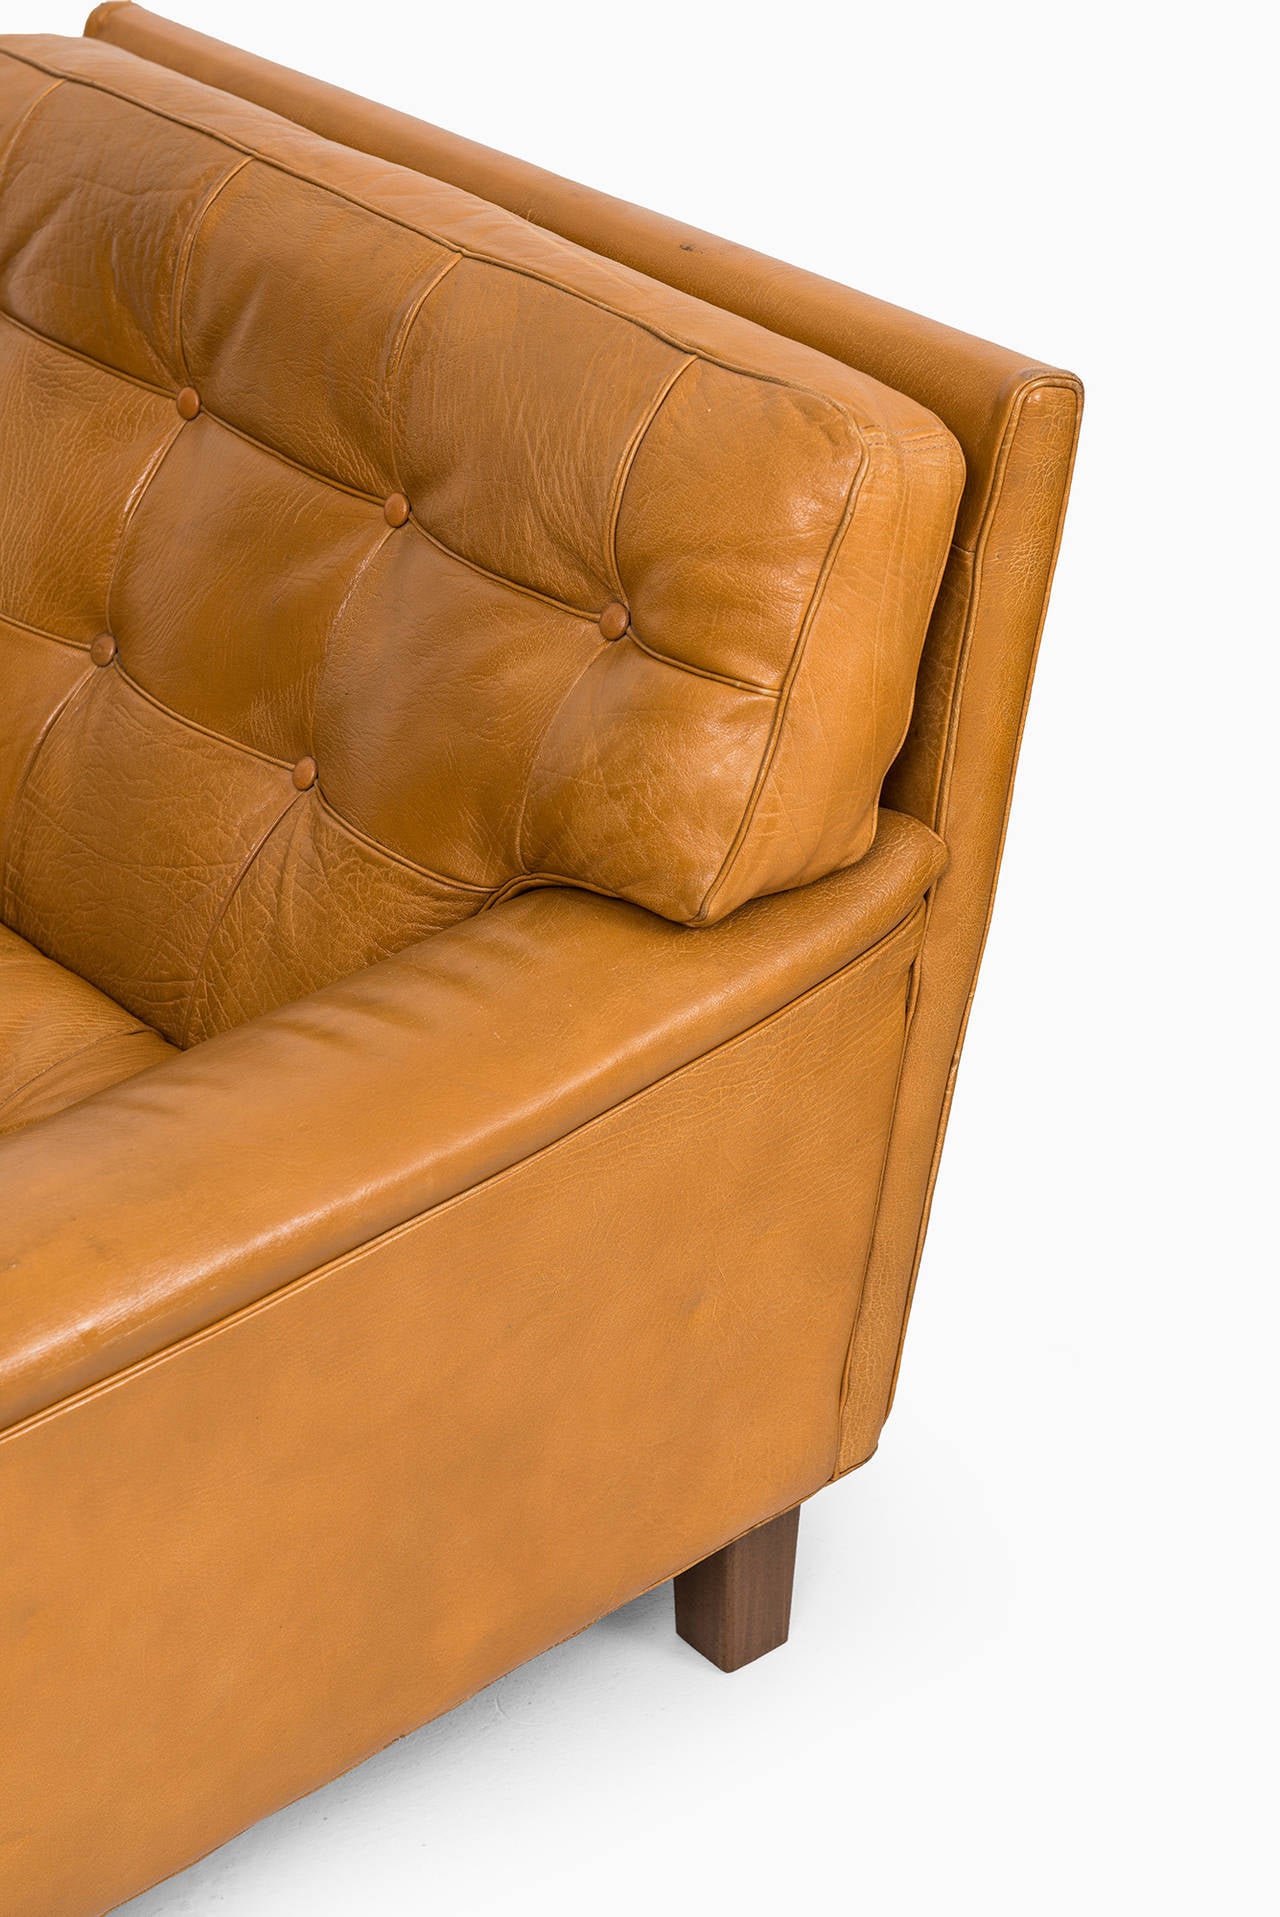 A pair of easy chairs model Merkur in cognac brown leather designed by Arne Norell. Produced by Norell AB in Sweden.